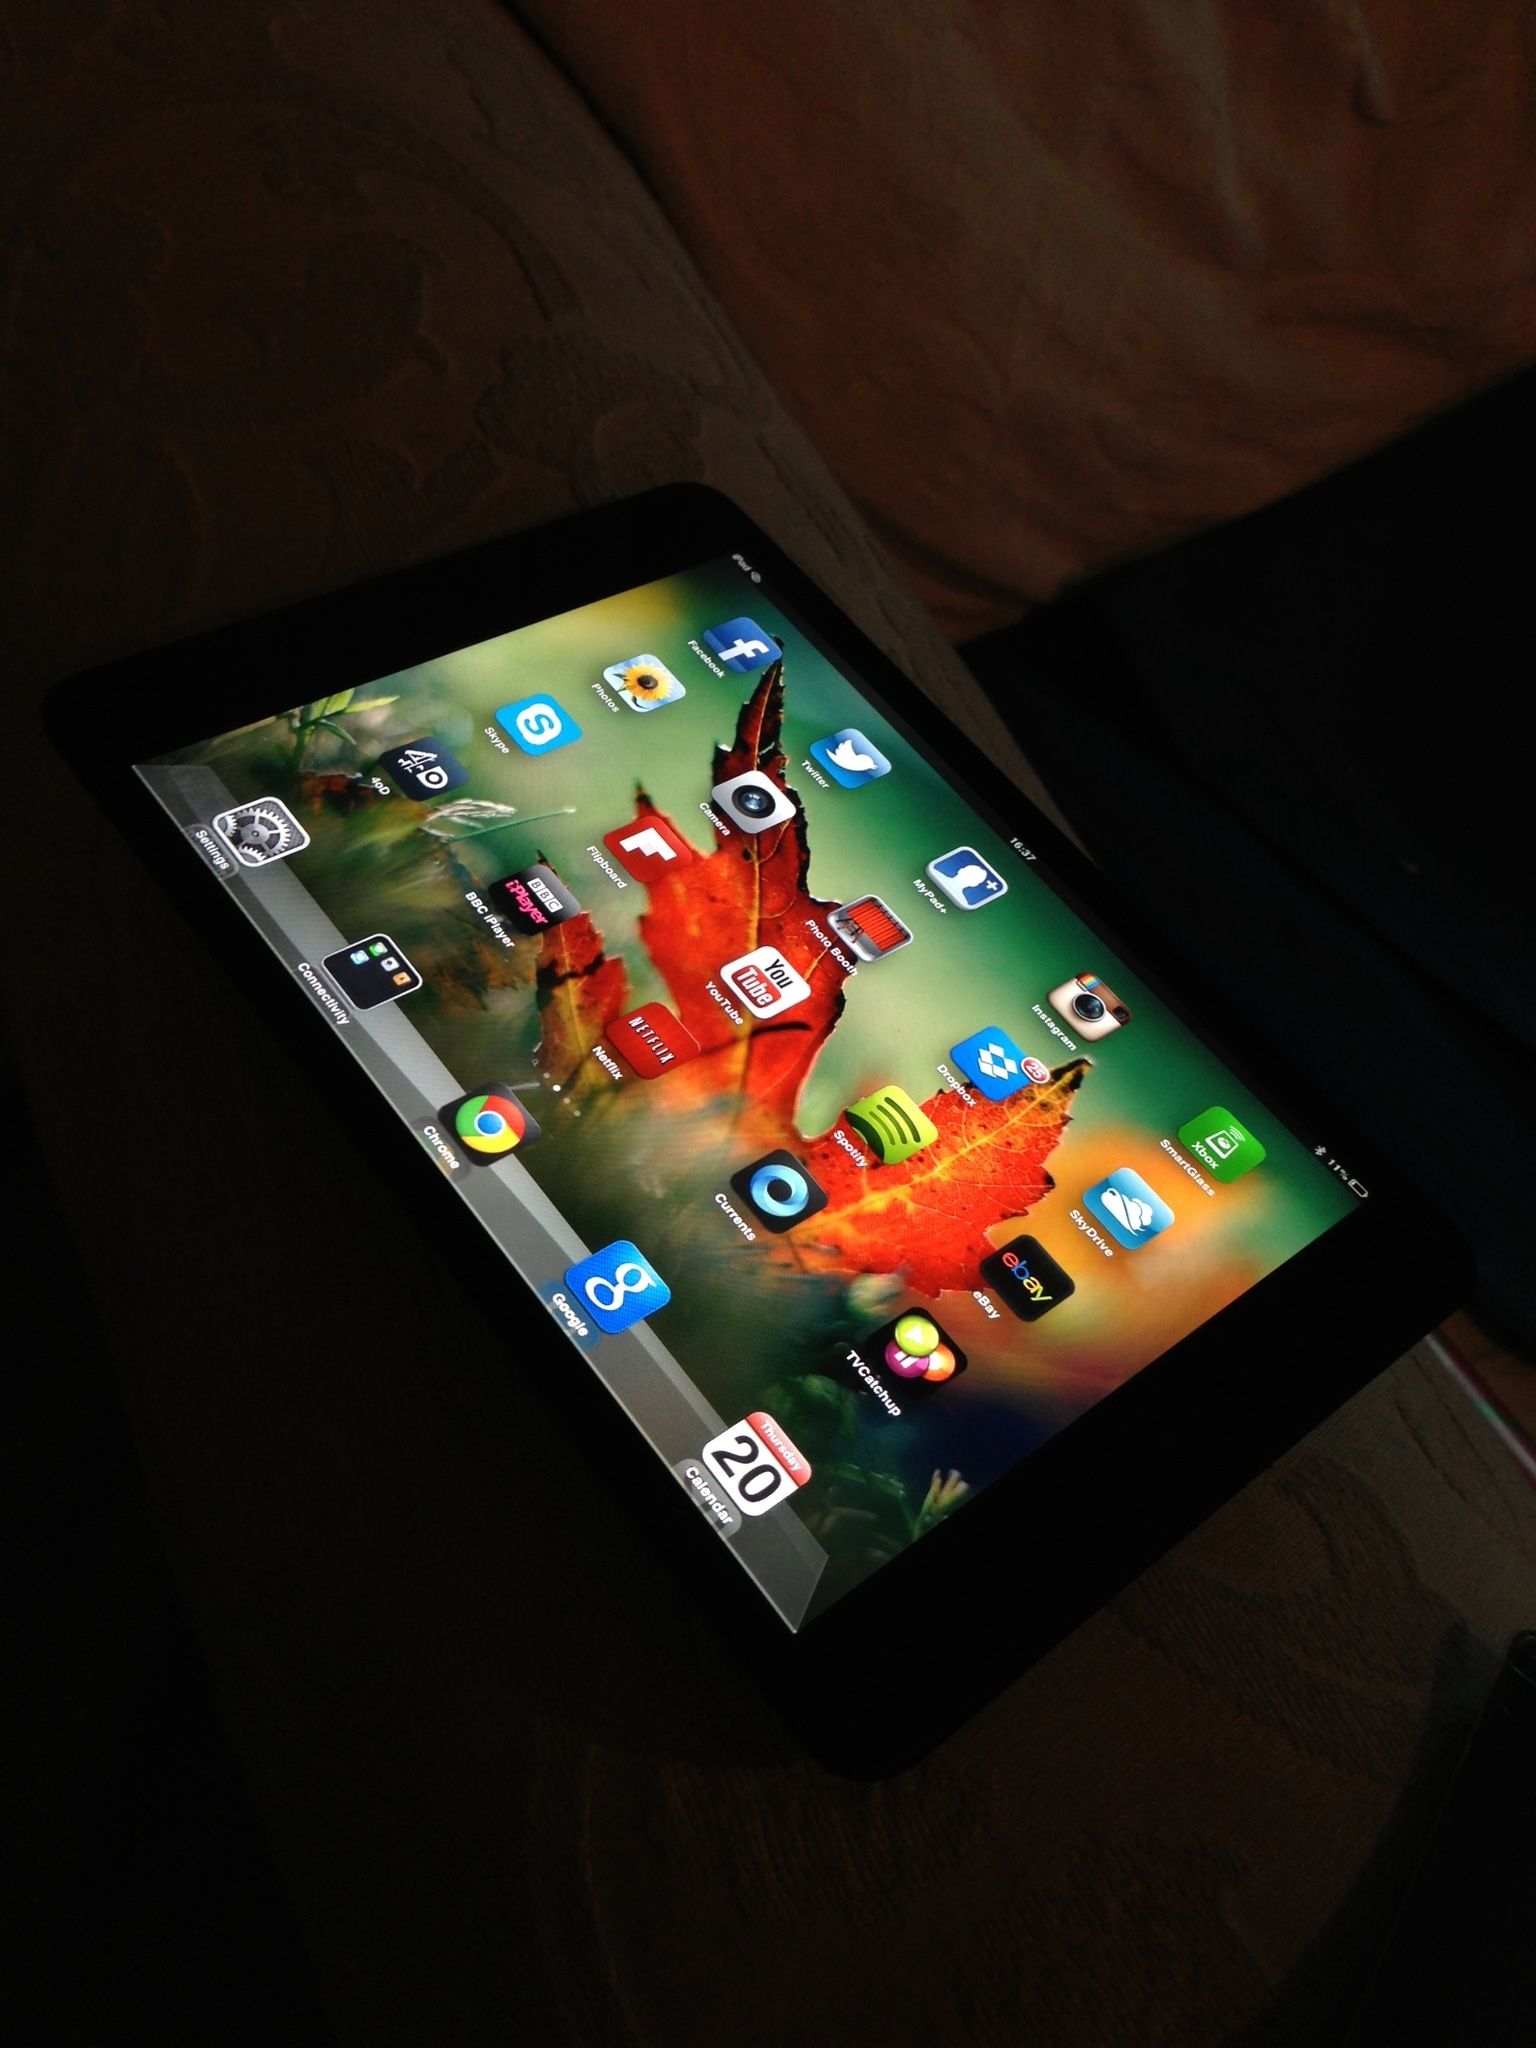 how to clean ipad screen disinfect